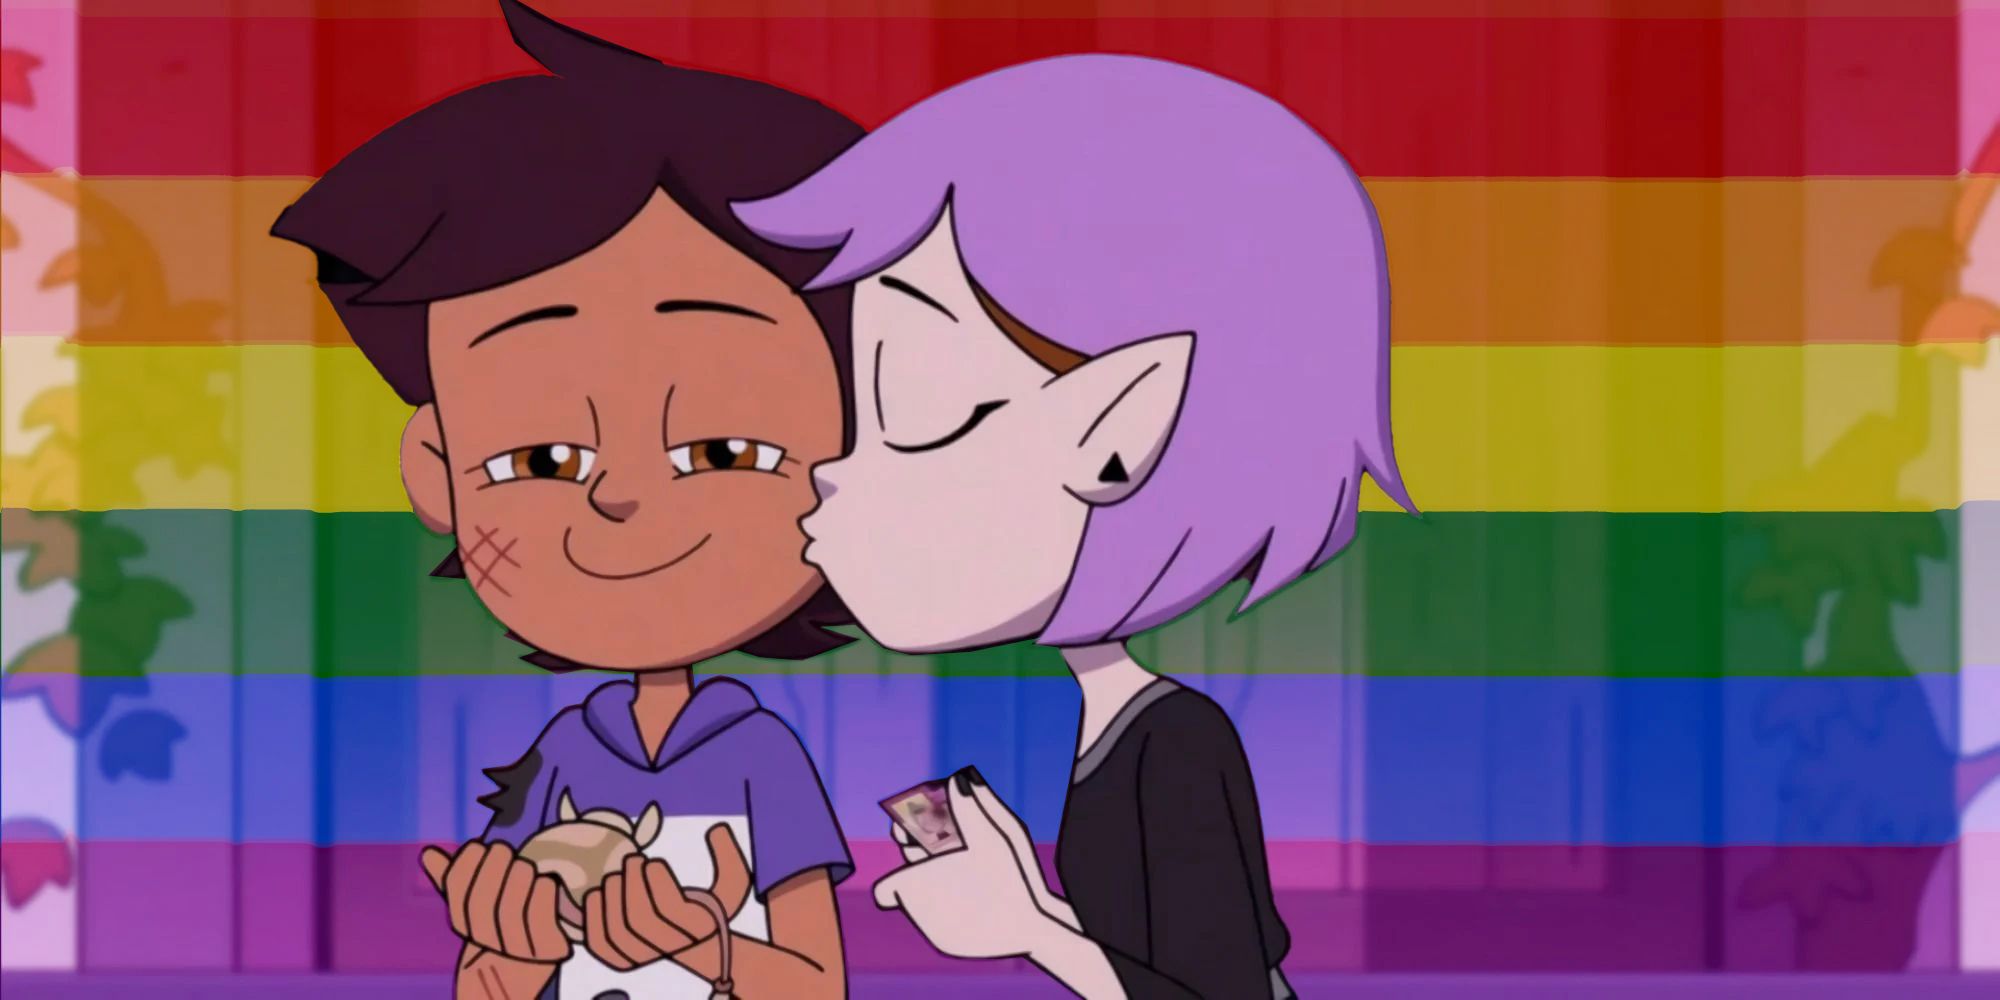 The Owl House” Features Disney Channel's First Bisexual Lead Character